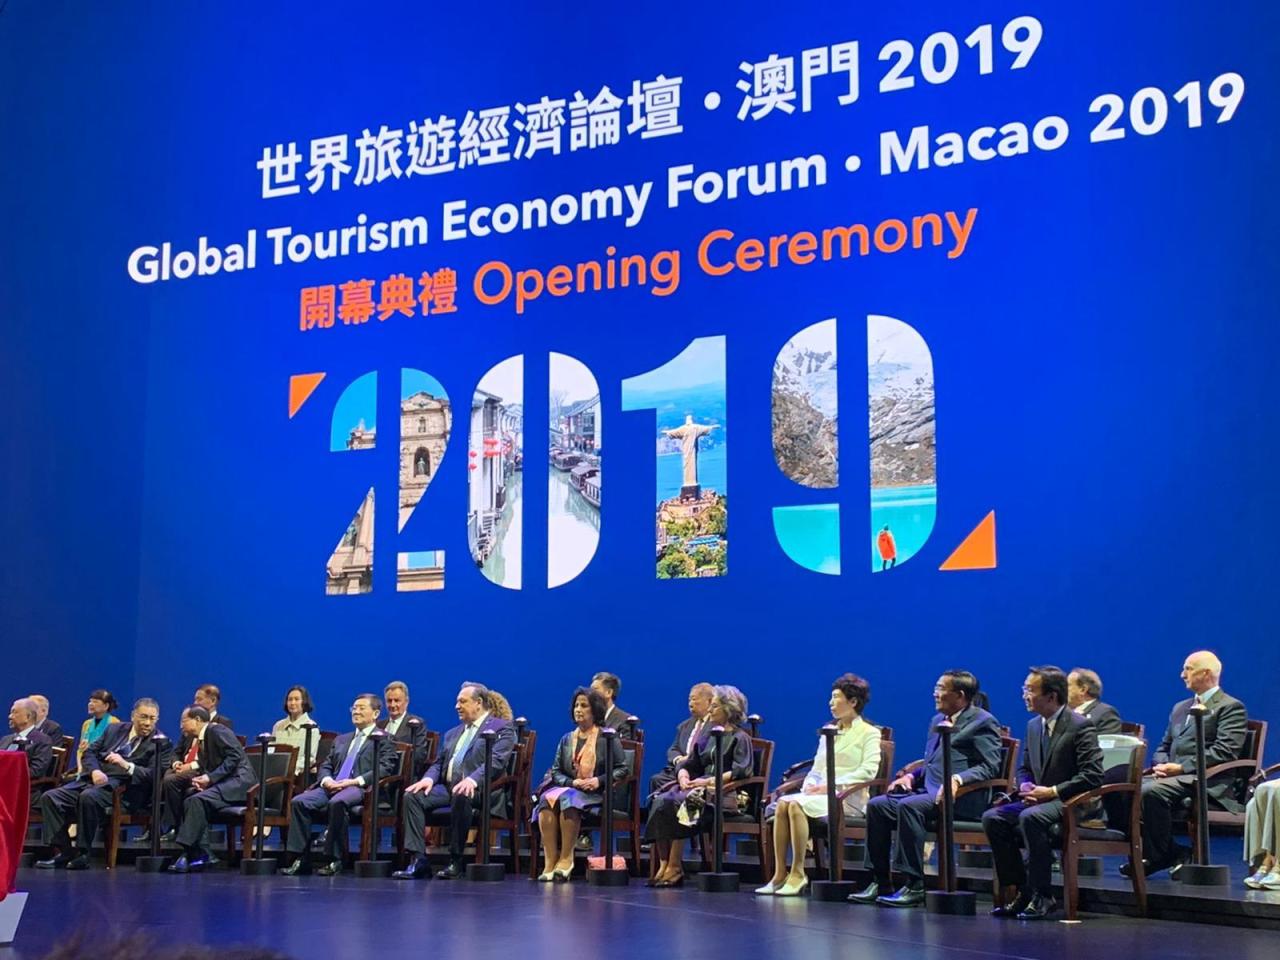 Global tourism economy forum kicks off in China's Macao